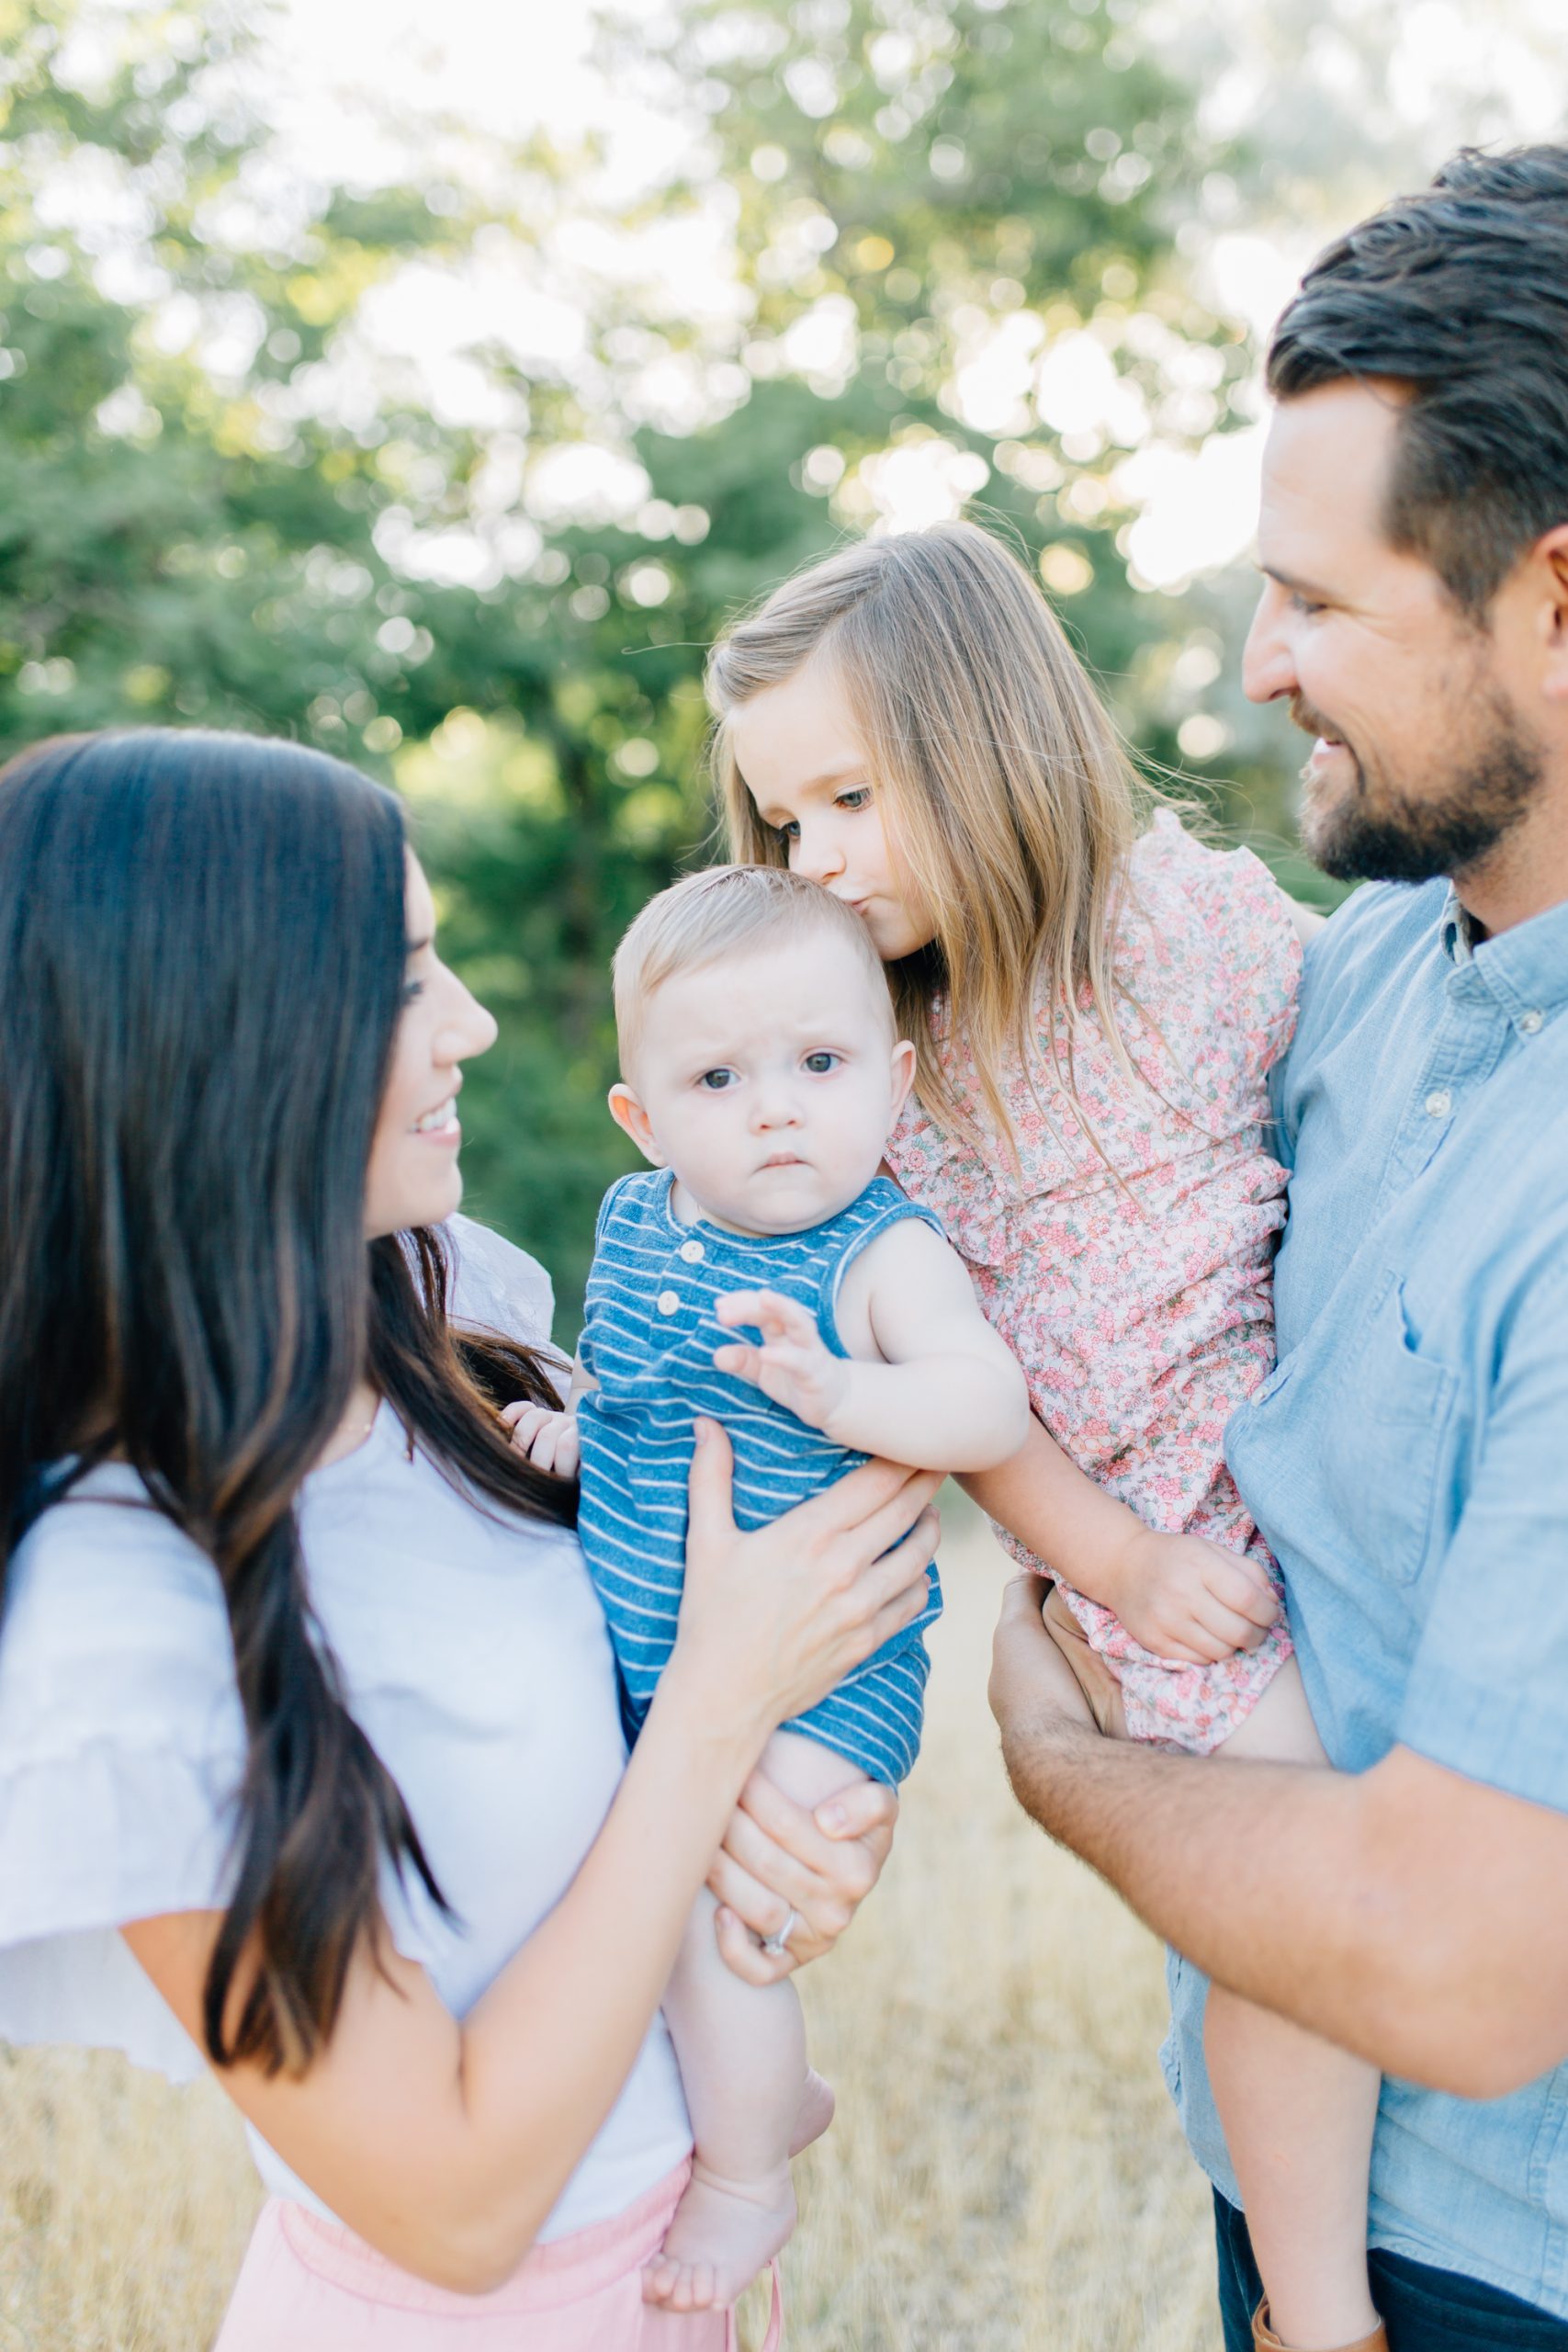 Extended Family Photoshoot | 8 Reasons to Book Your Family Session